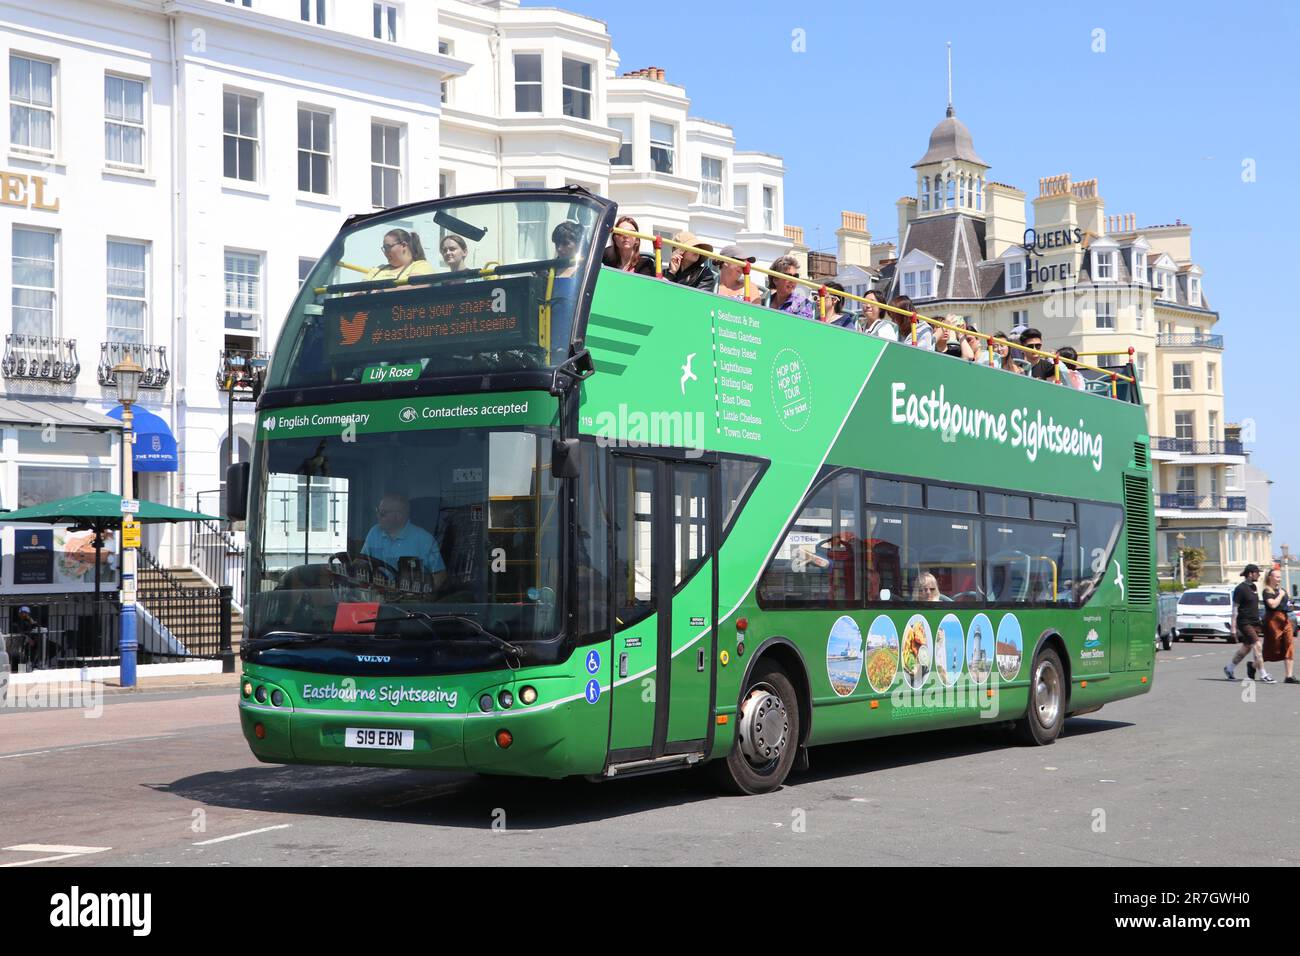 EASTBOURNE SIGHTSEEING TOUR BUS Stock Photo